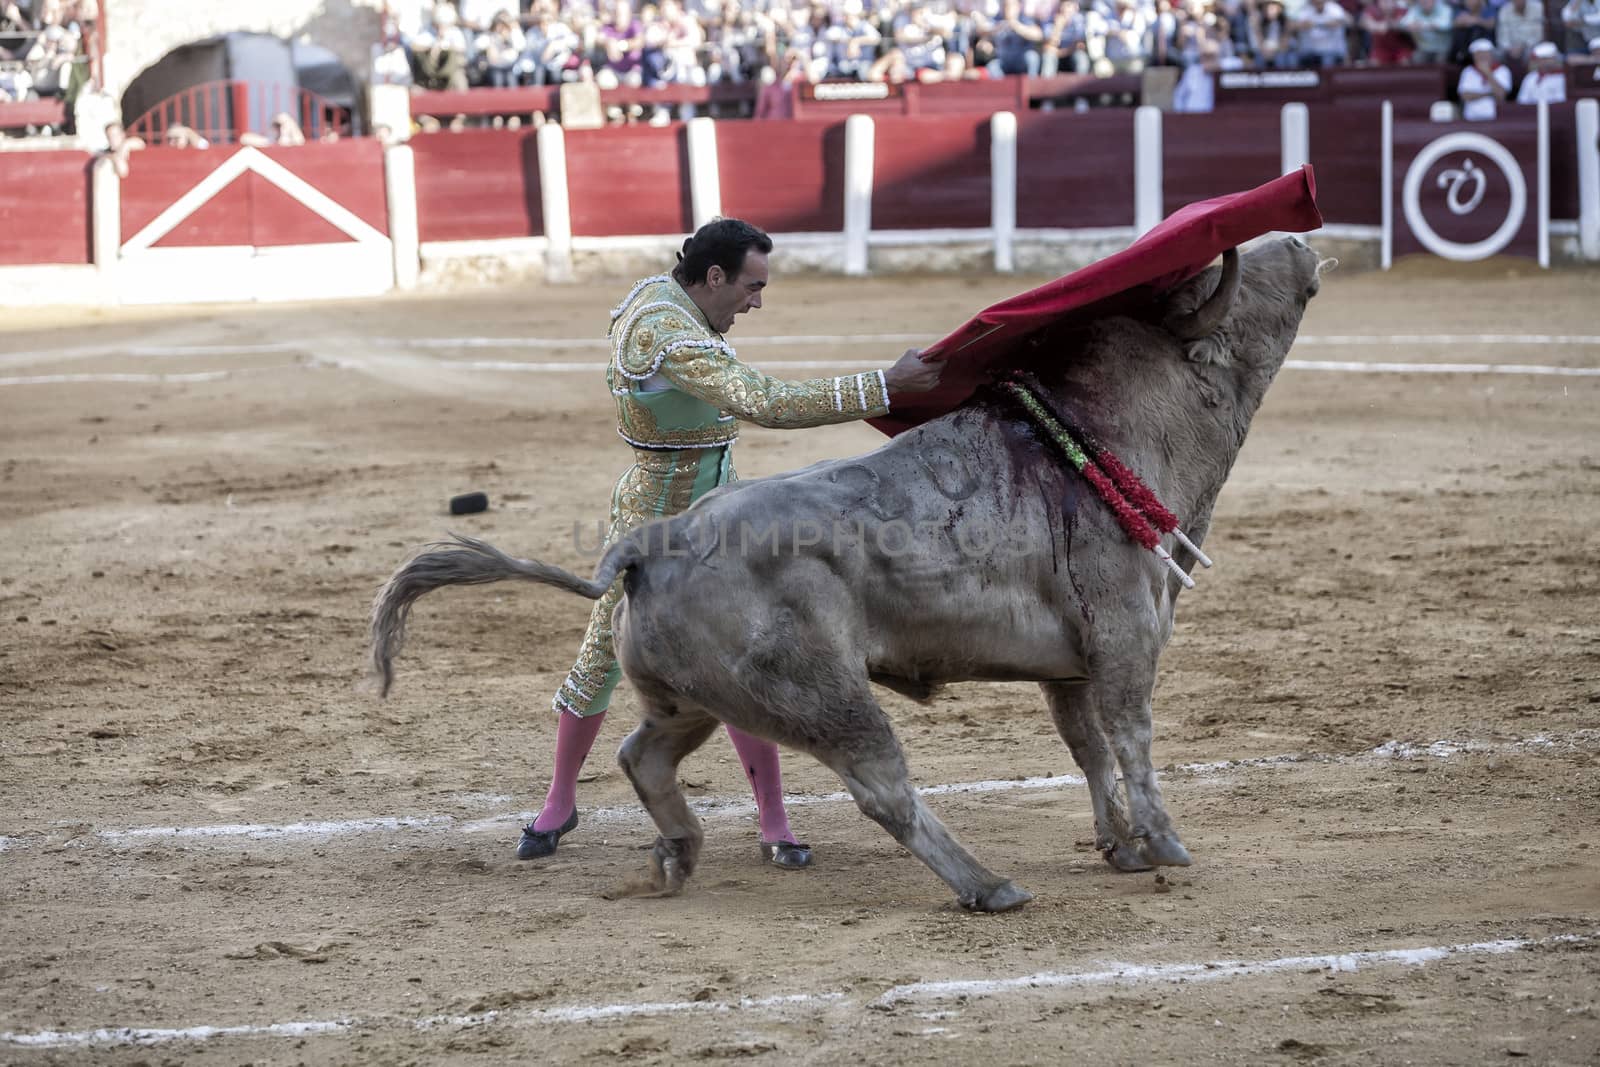 Ubeda, Jaen province, SPAIN - 29 september 2010: Spanish bullfighter Manuel Jesus with the cape bullfighting a bull of nearly 600 kg of grey ash during a bullfight held in Ubeda, Jaen province, Spain, 29 september 2010